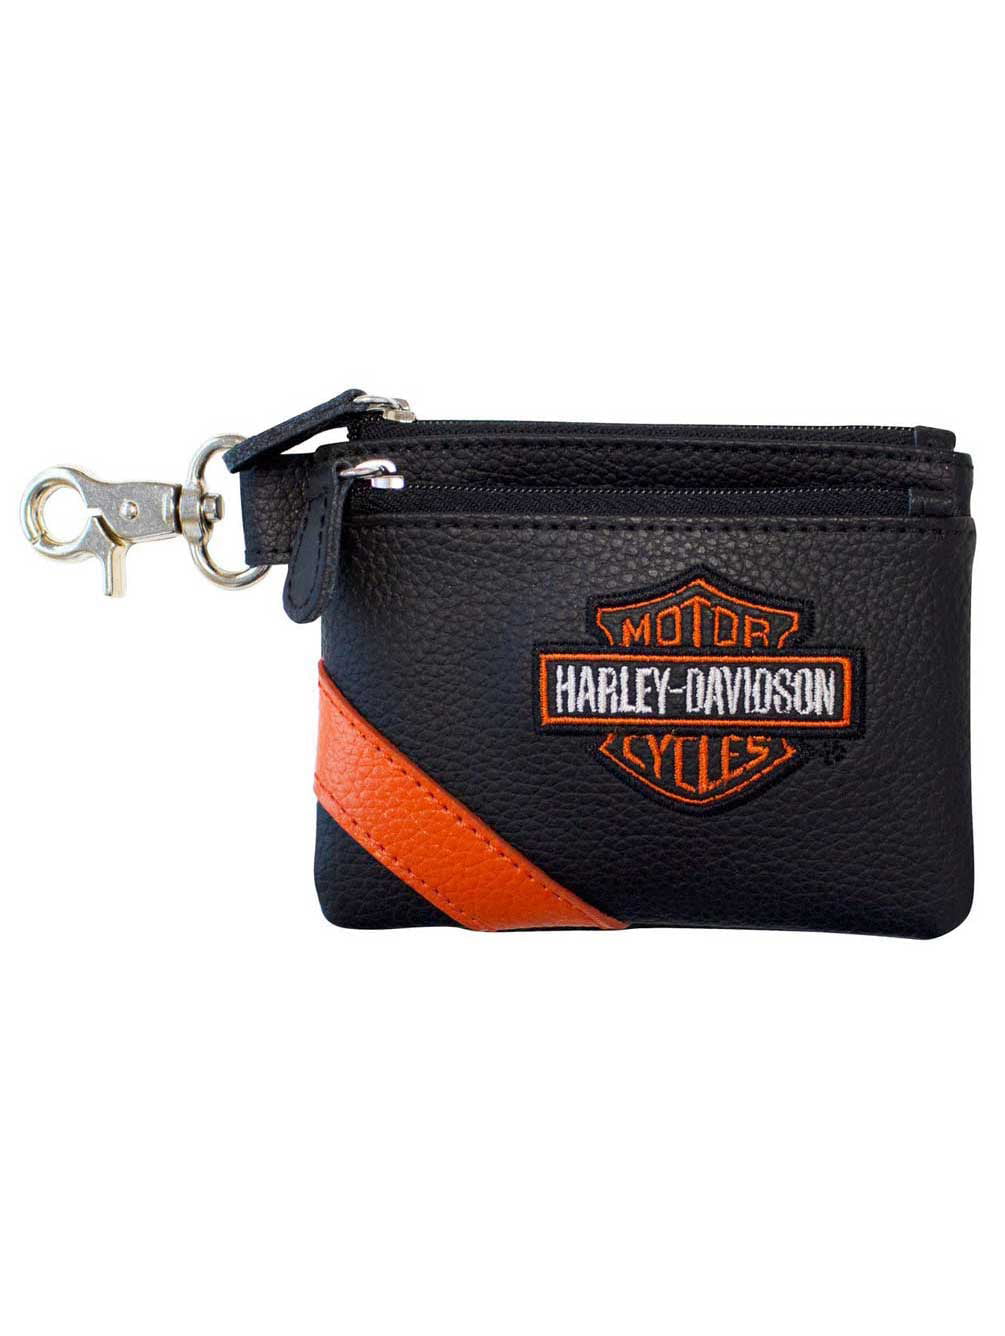 Harley-Davidson Women's Vintage B&S Embroidery Leather Coin Pouch  VBS6281-ORGBLK, Harley Davidson 